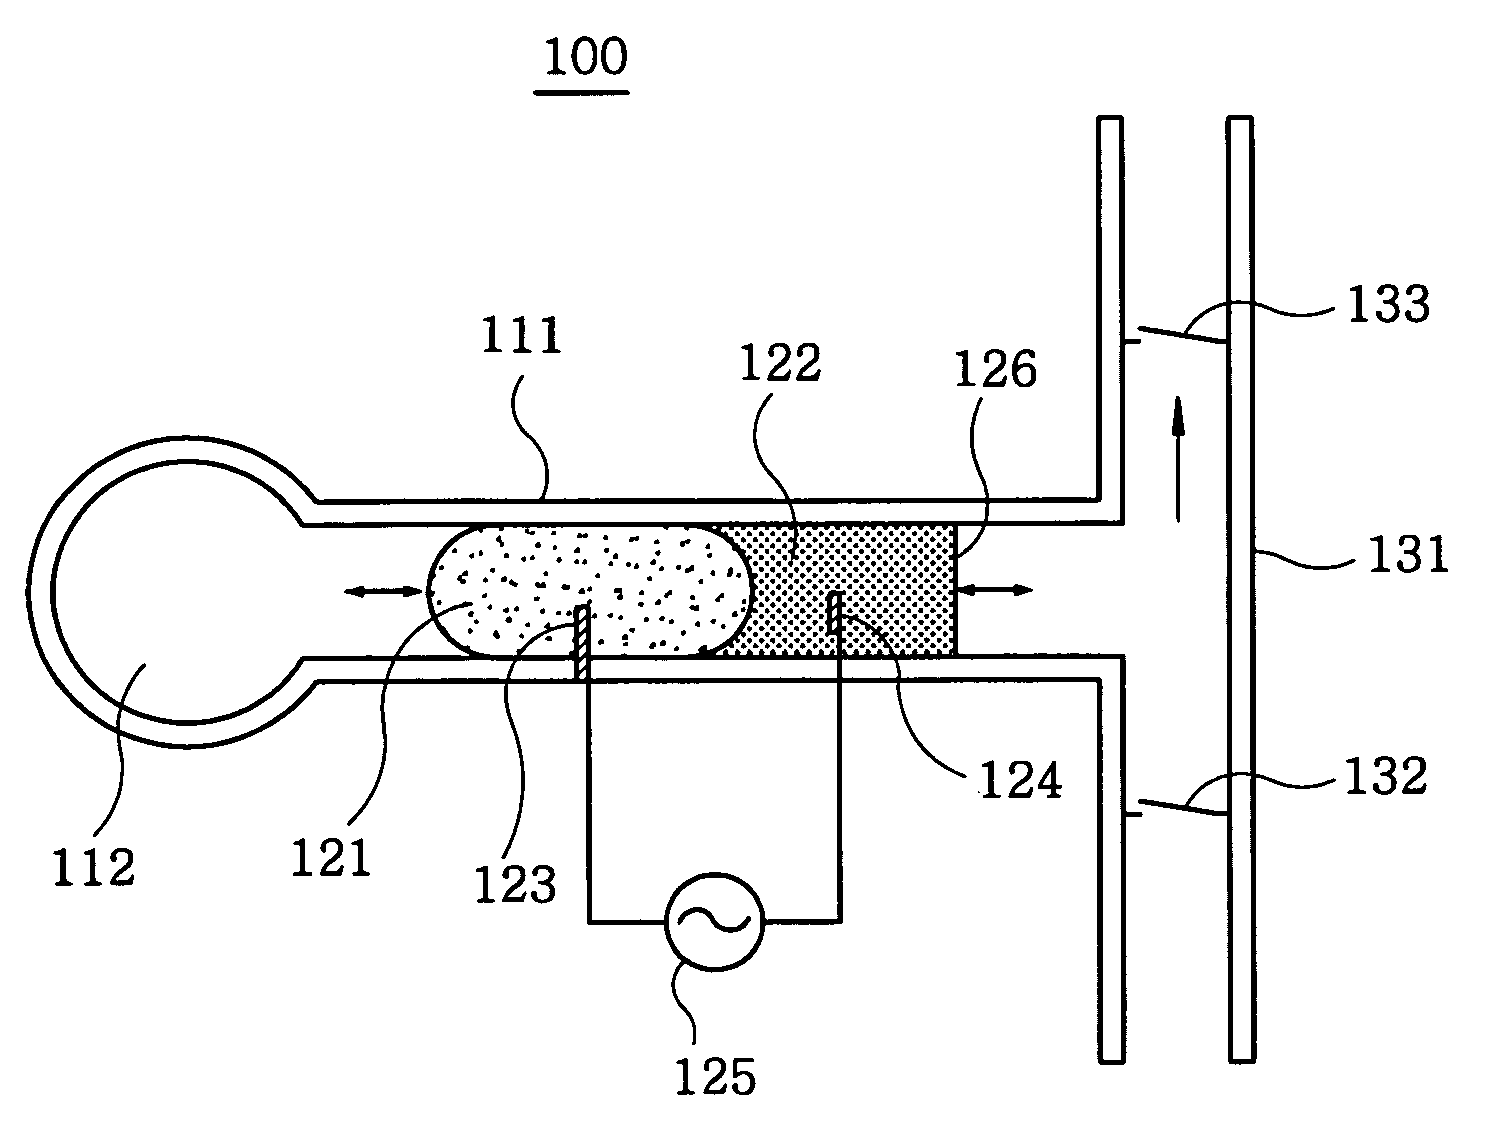 Micropump controlled by electrocapillary and gas pressures